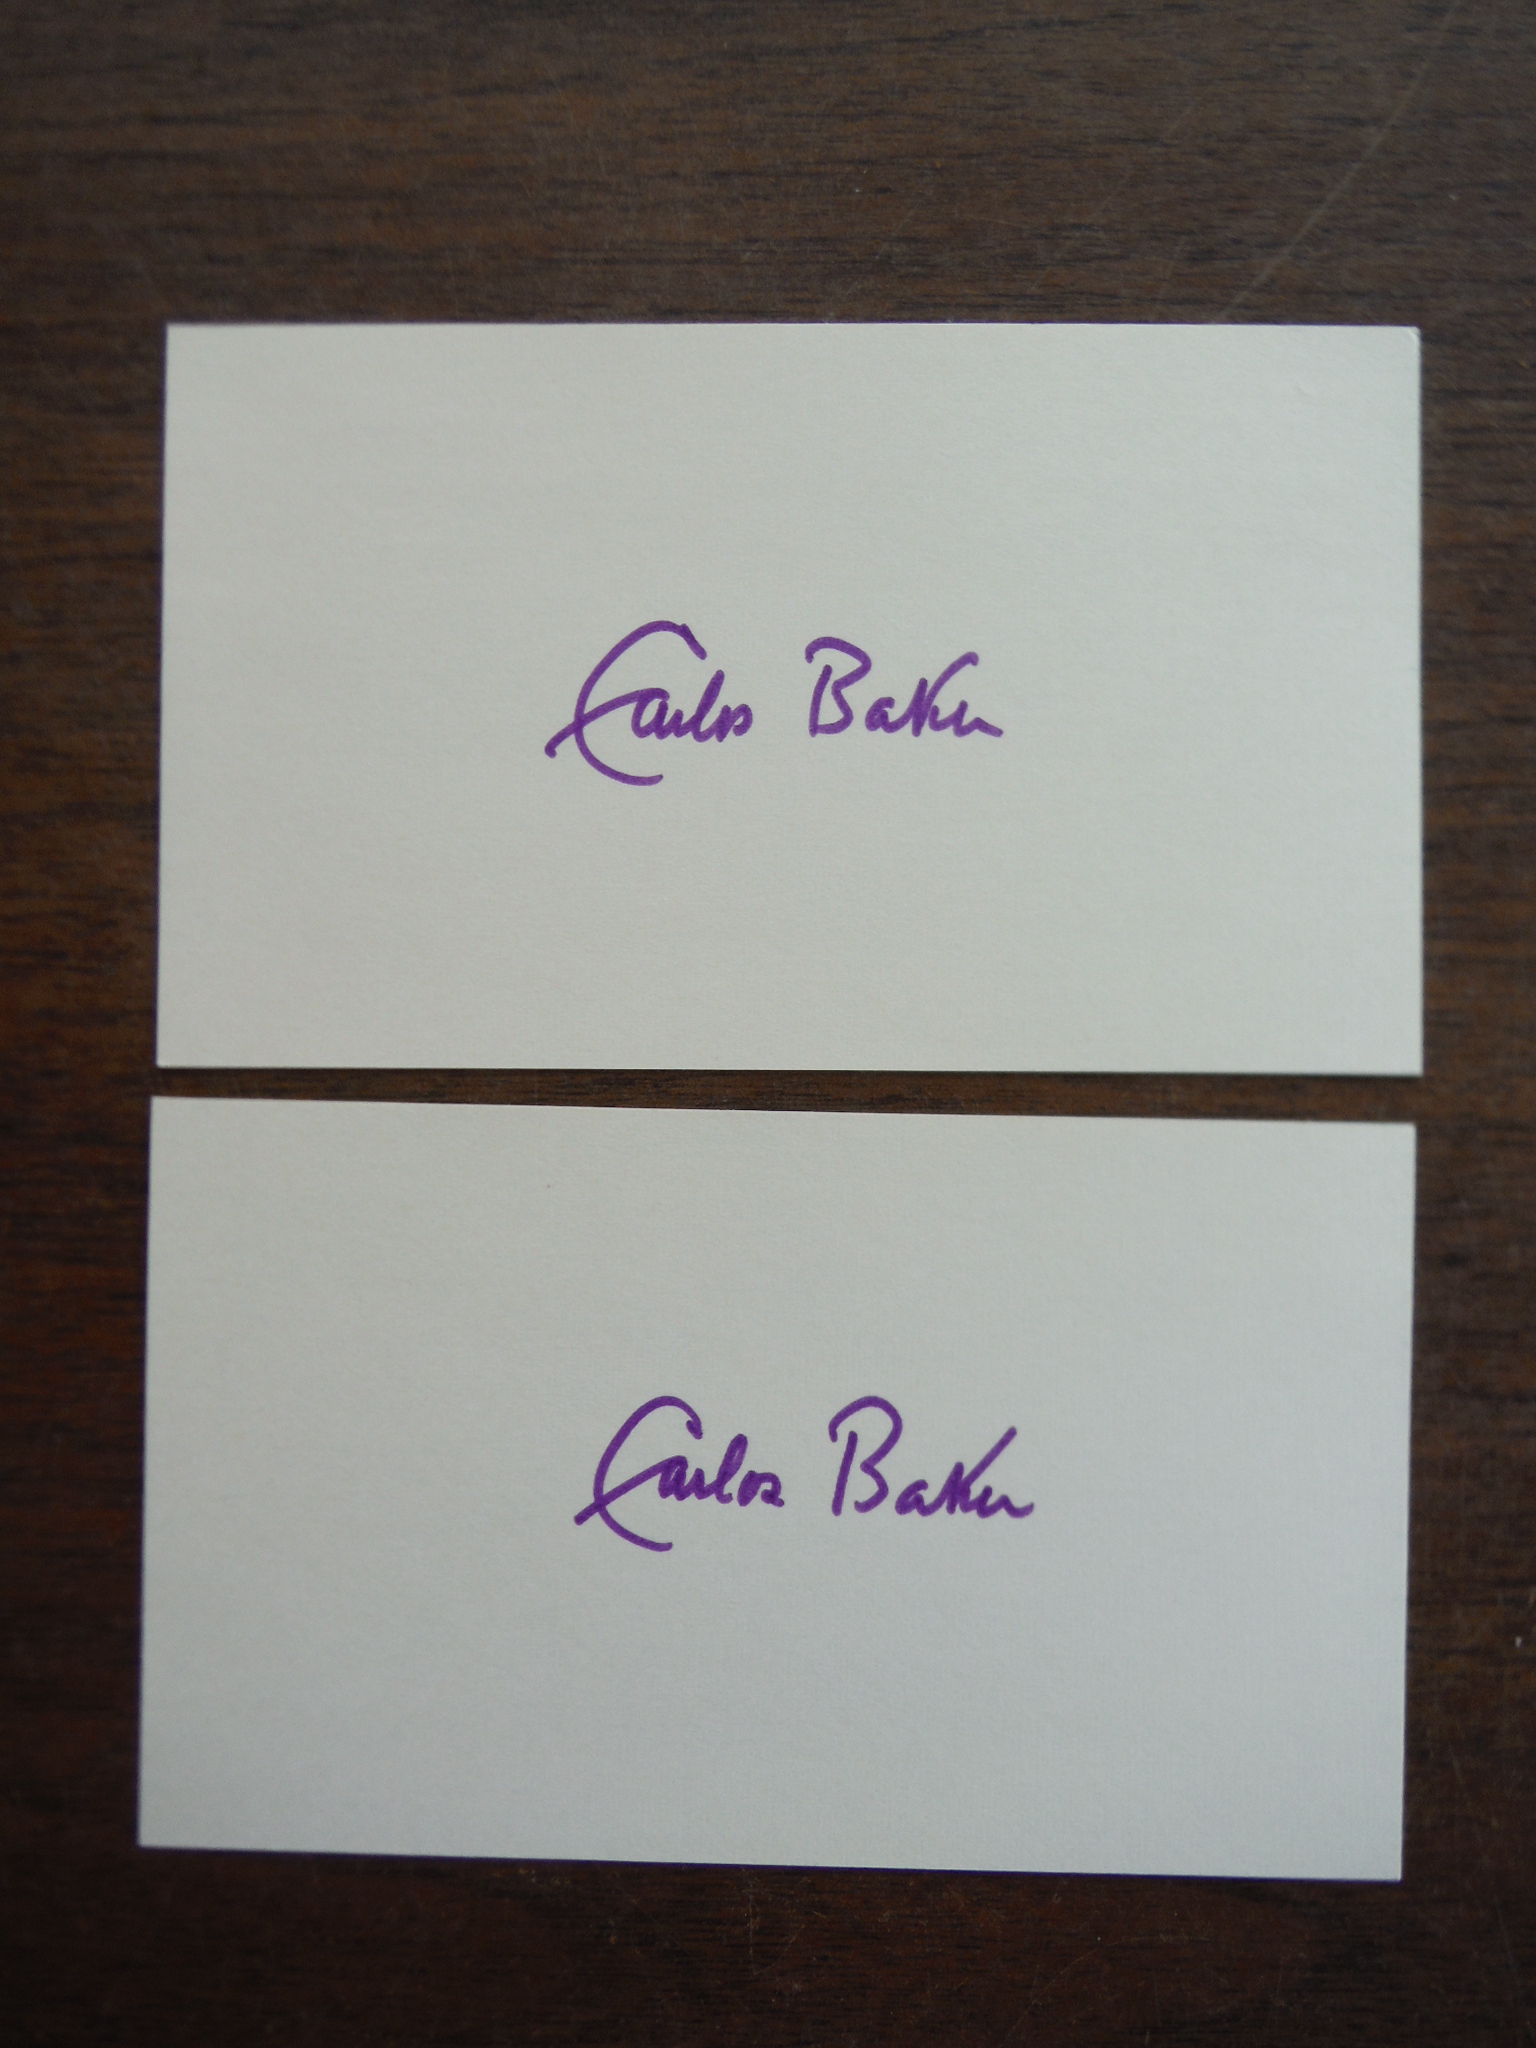 Image 0 of 2 Autographs of  Carlos Baker.